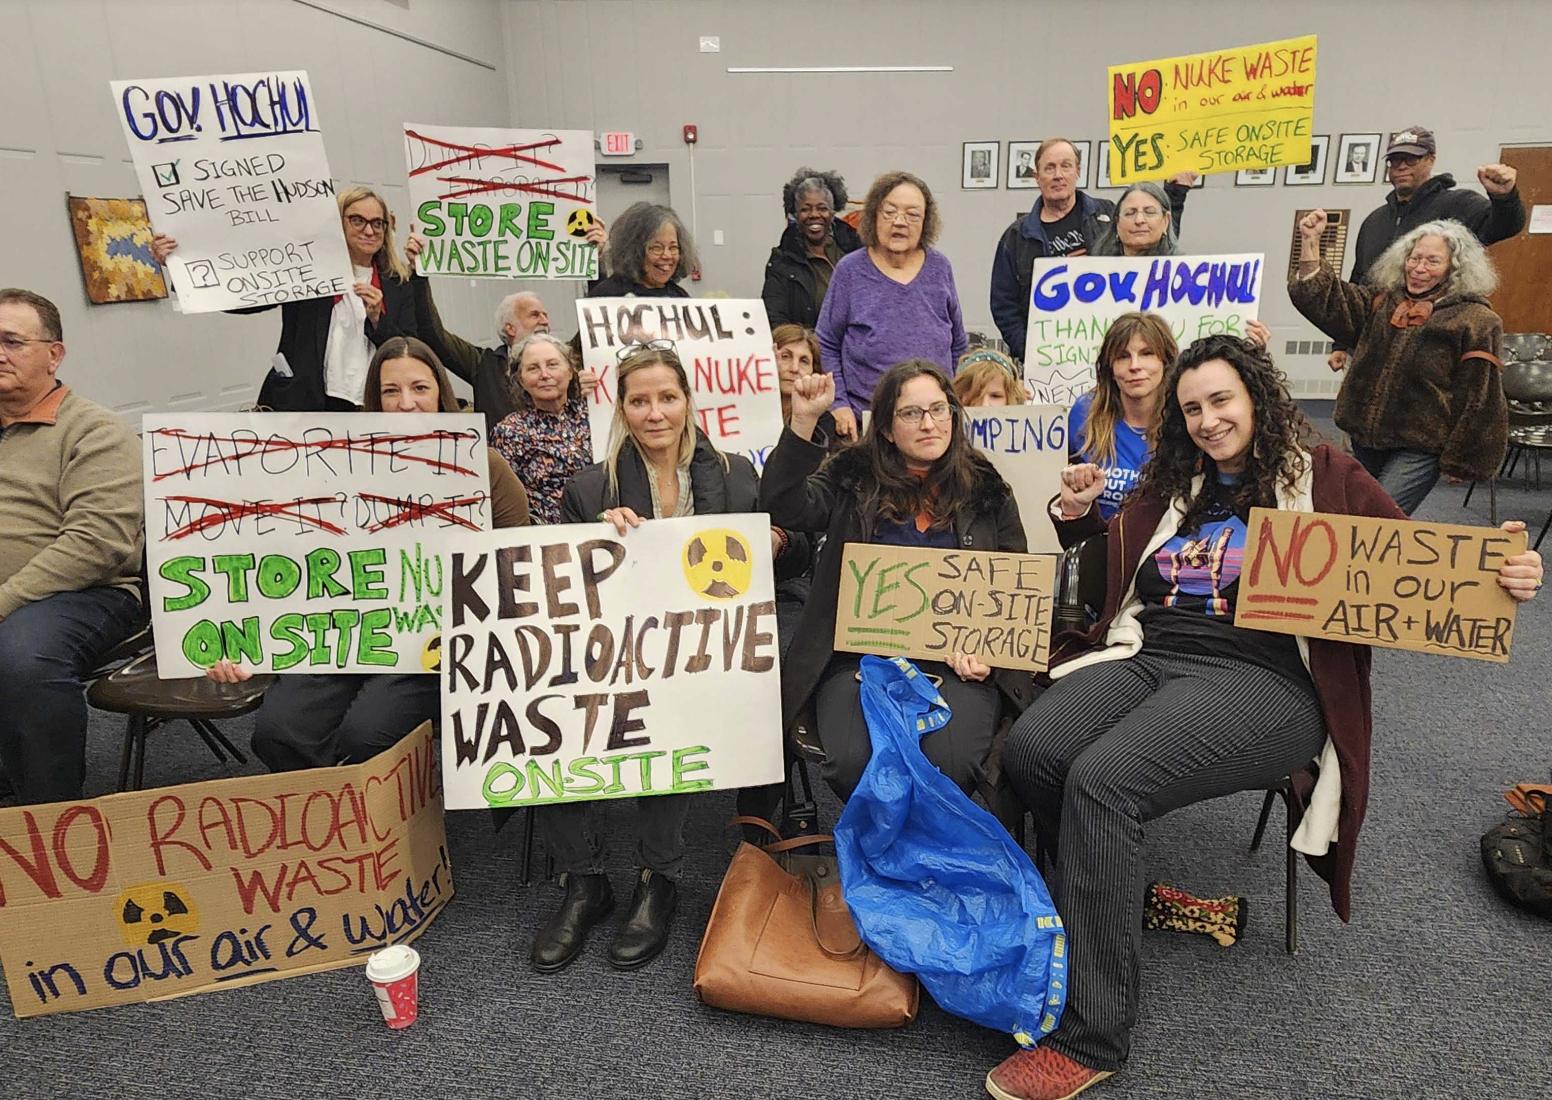 Cortlandt, NY: No Radioactive Waste in Our Air or Water!